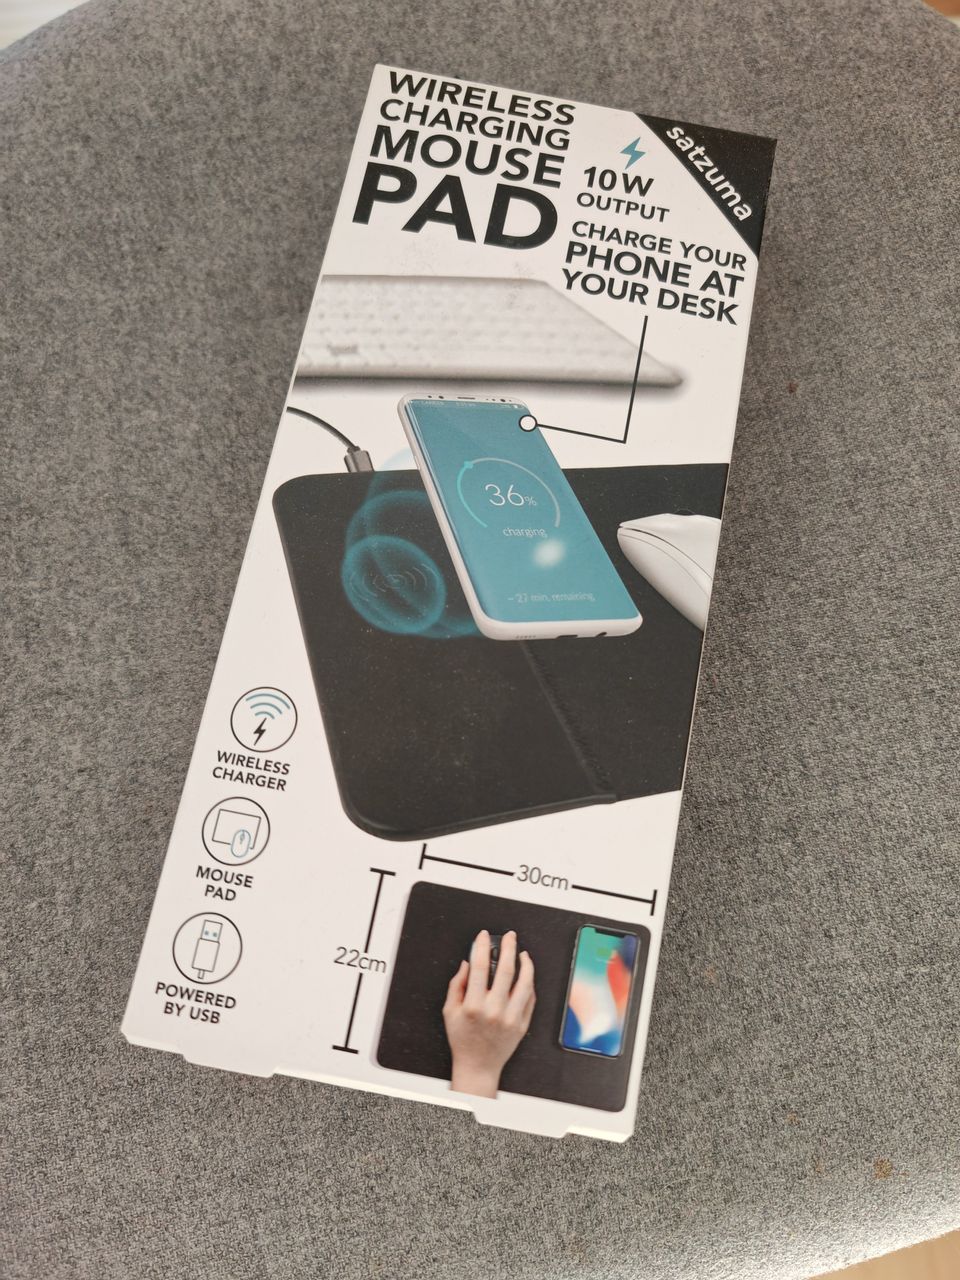 Mousepad with wireless charging